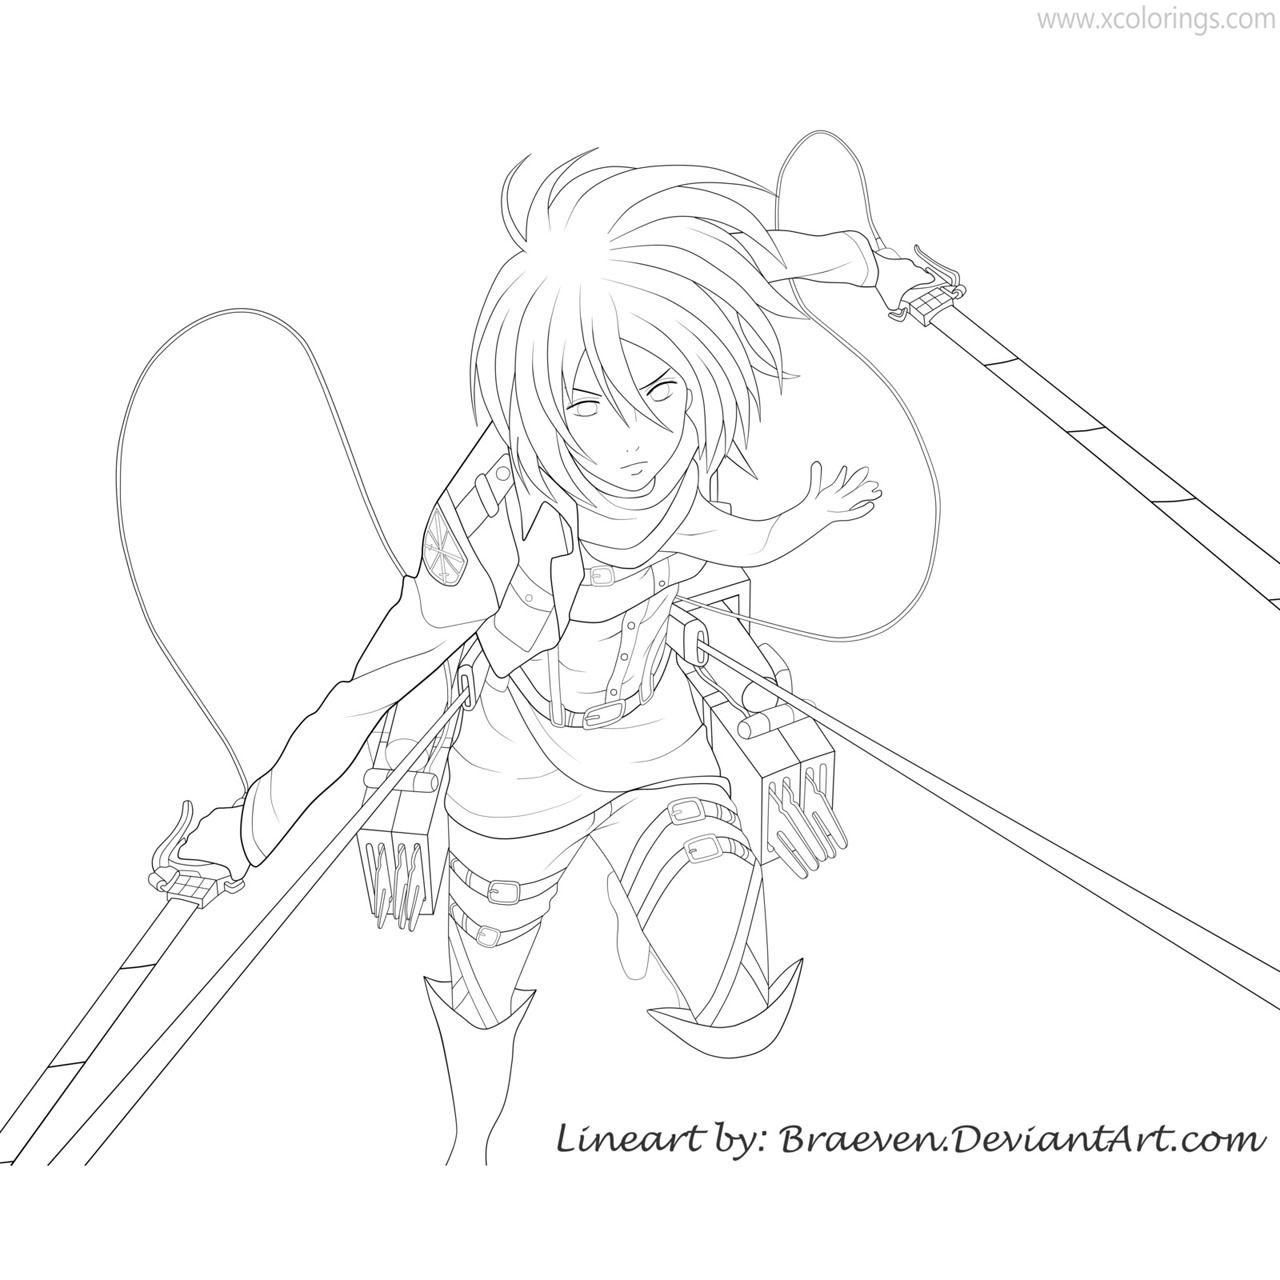 Free Attack On Titan Coloring Pages Fanart by Braeven printable